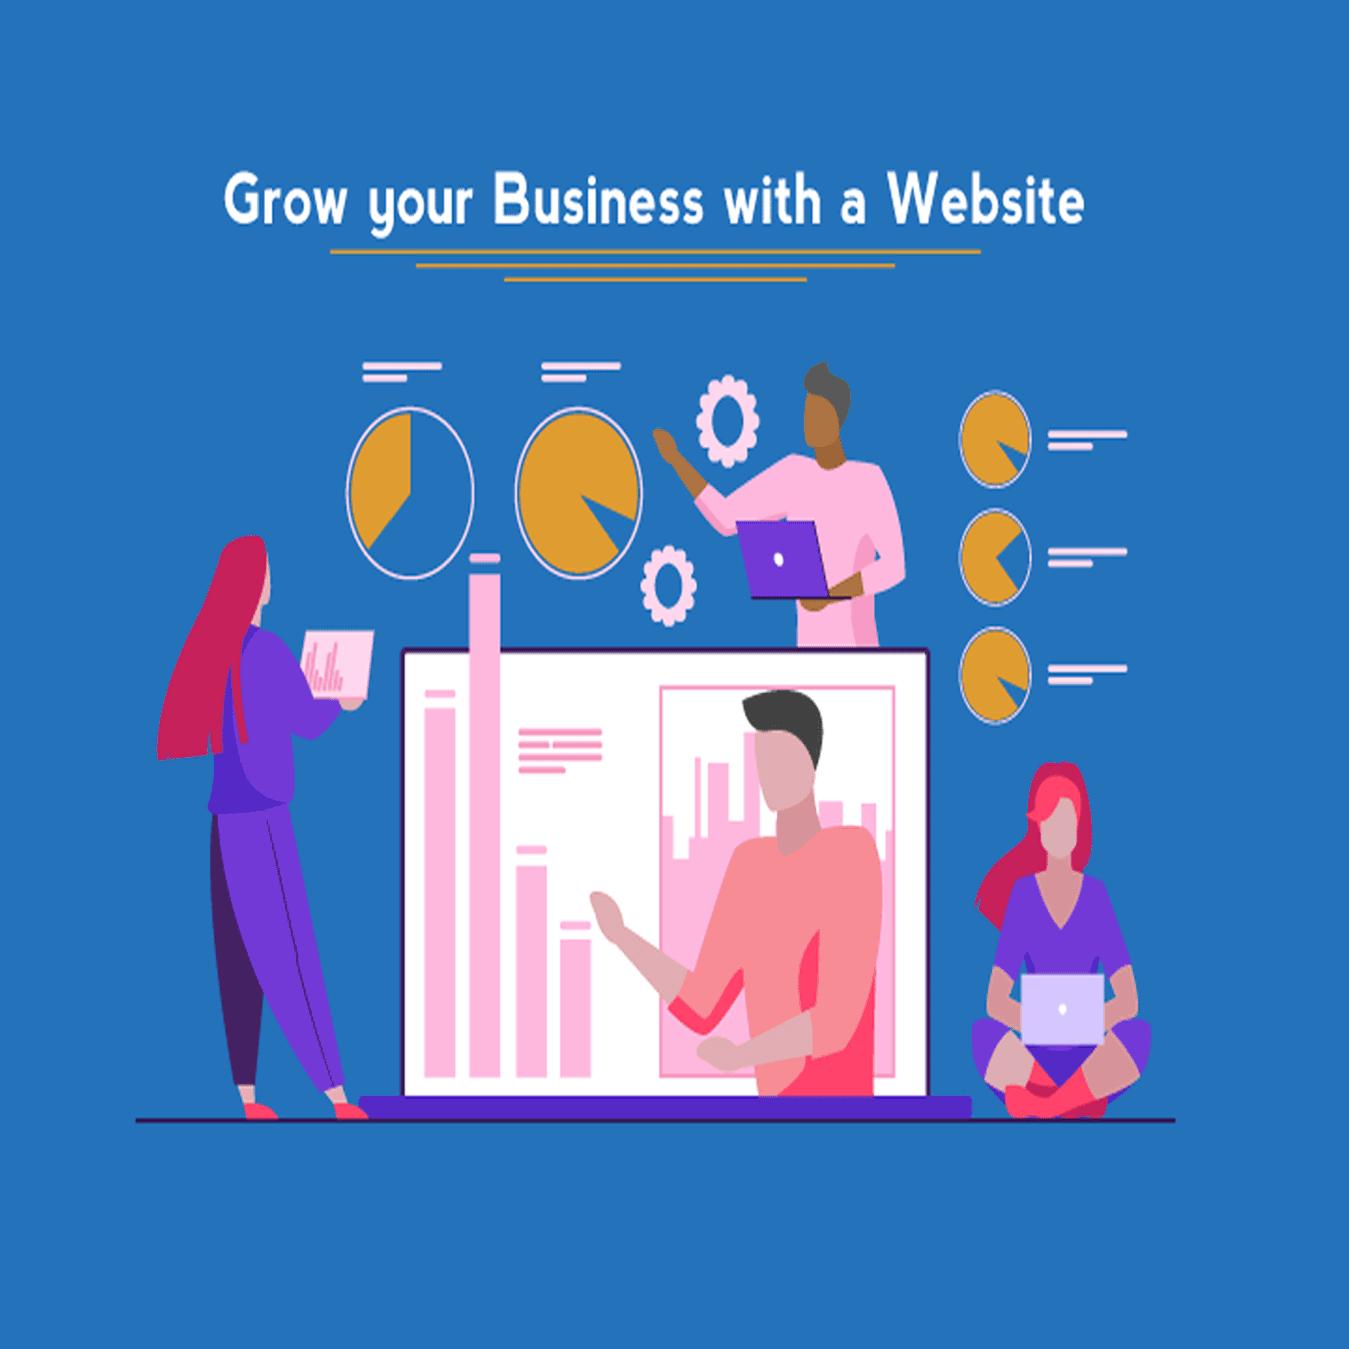 Grow-your-business-with-website